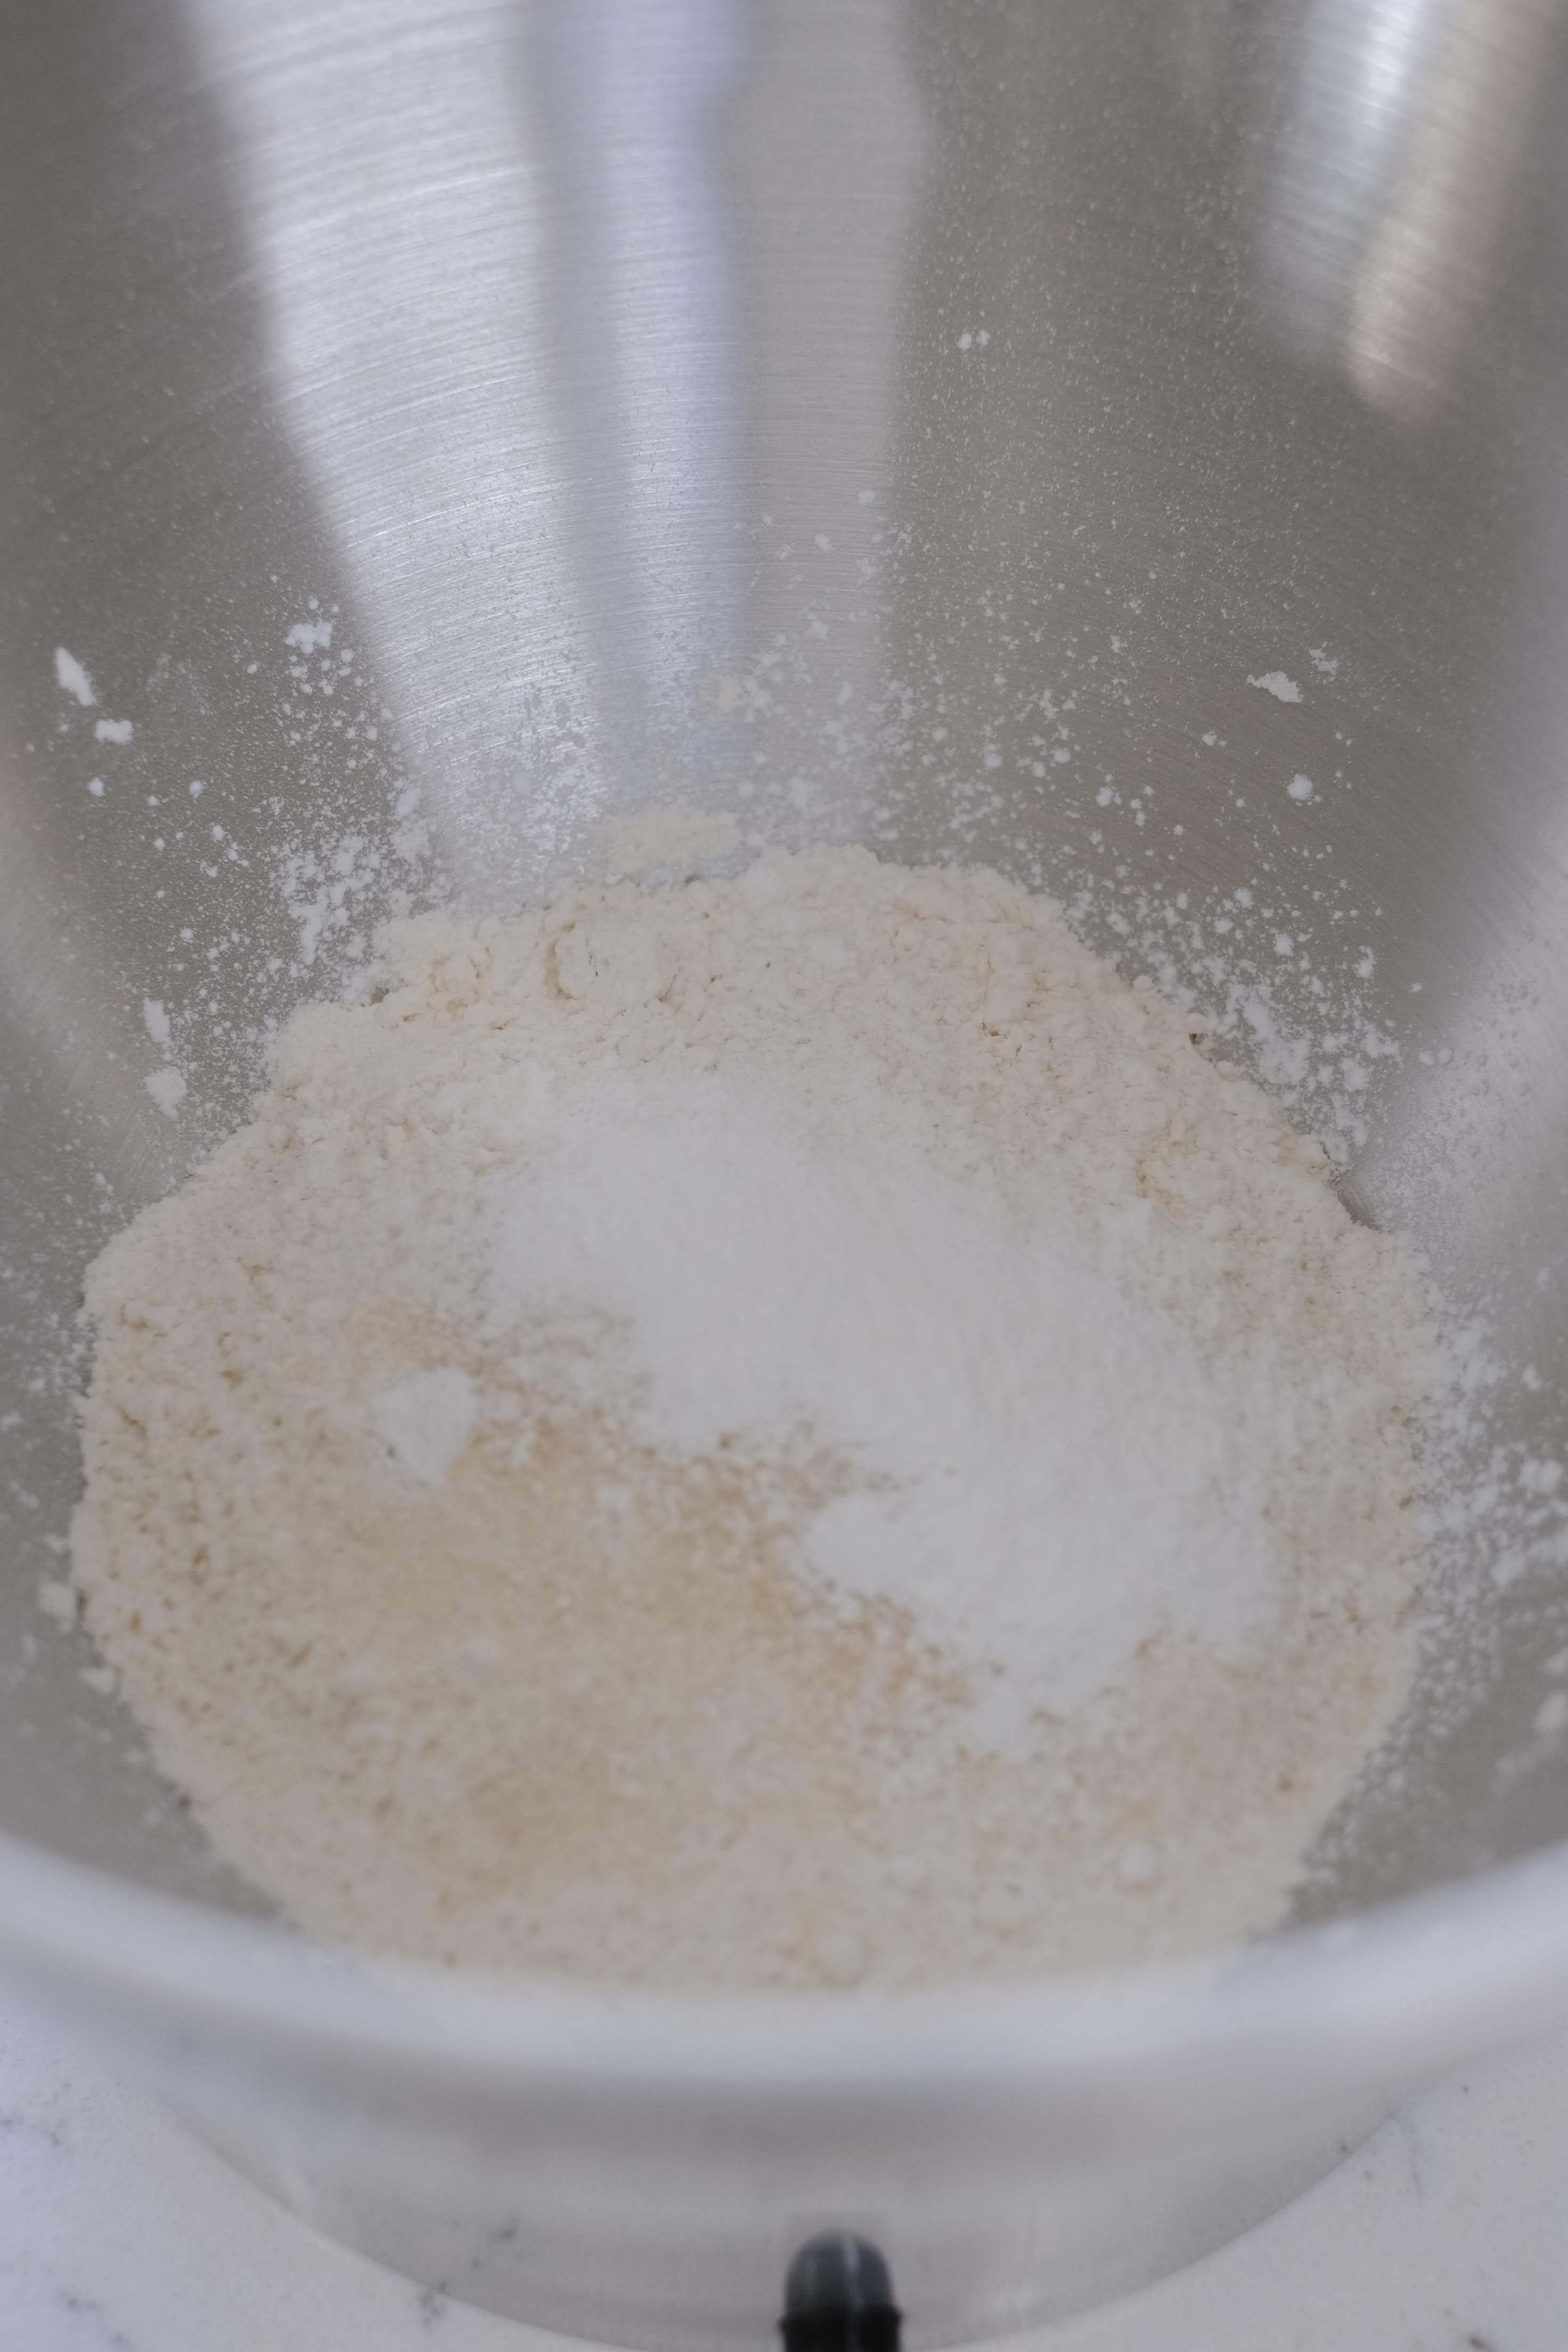 flour in stainless steel mixing bowl